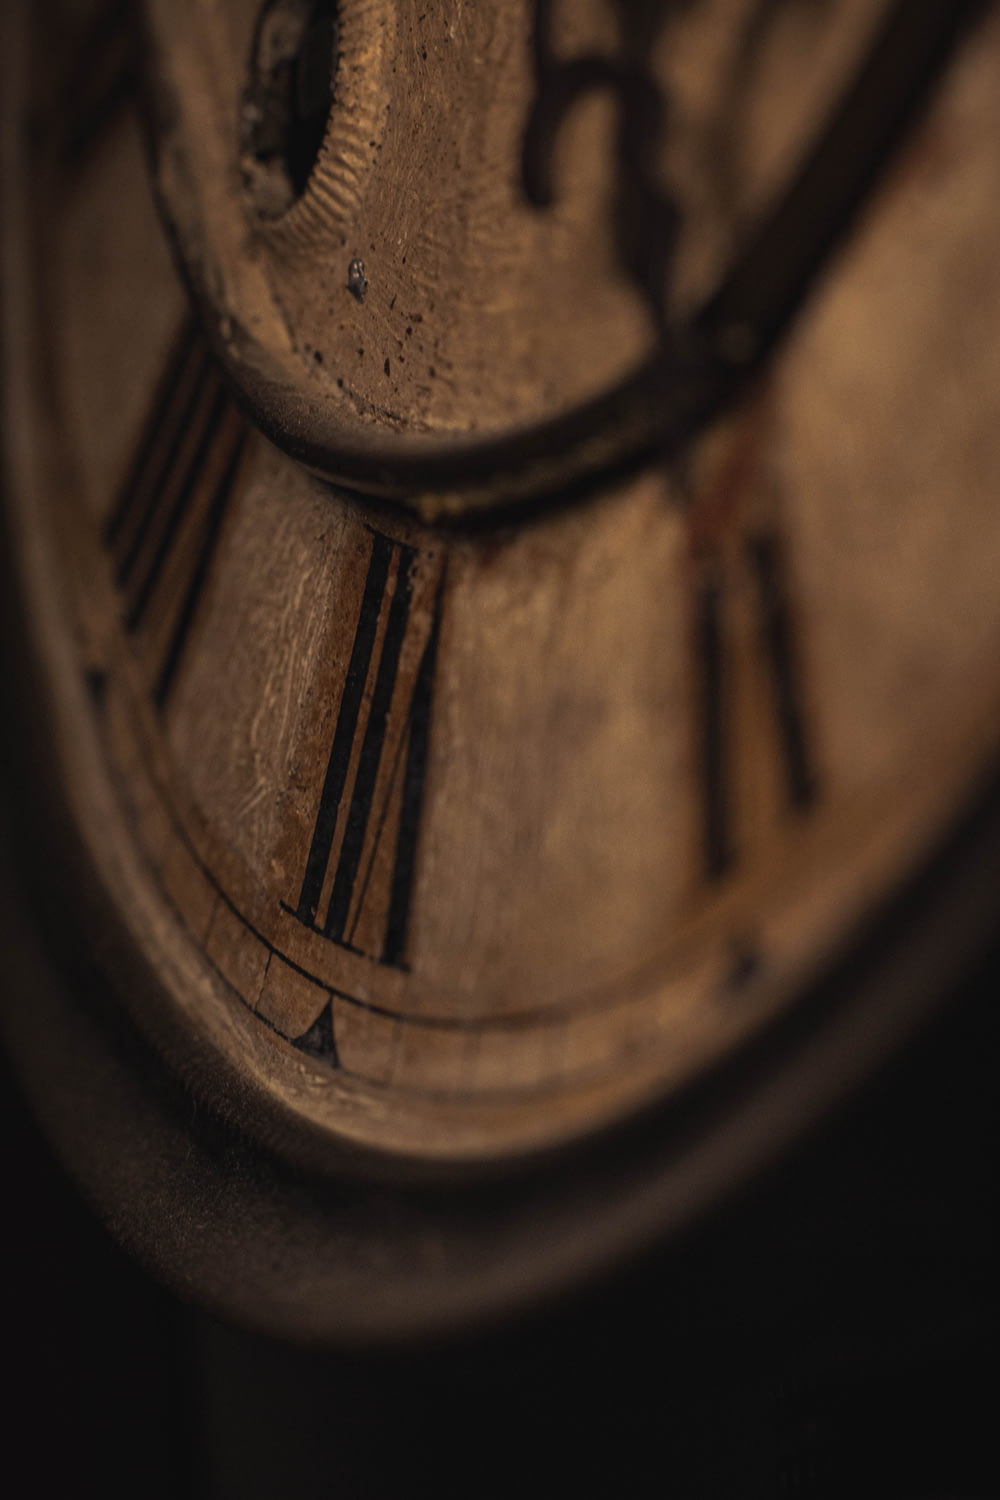 a close up of a clock with roman numerals